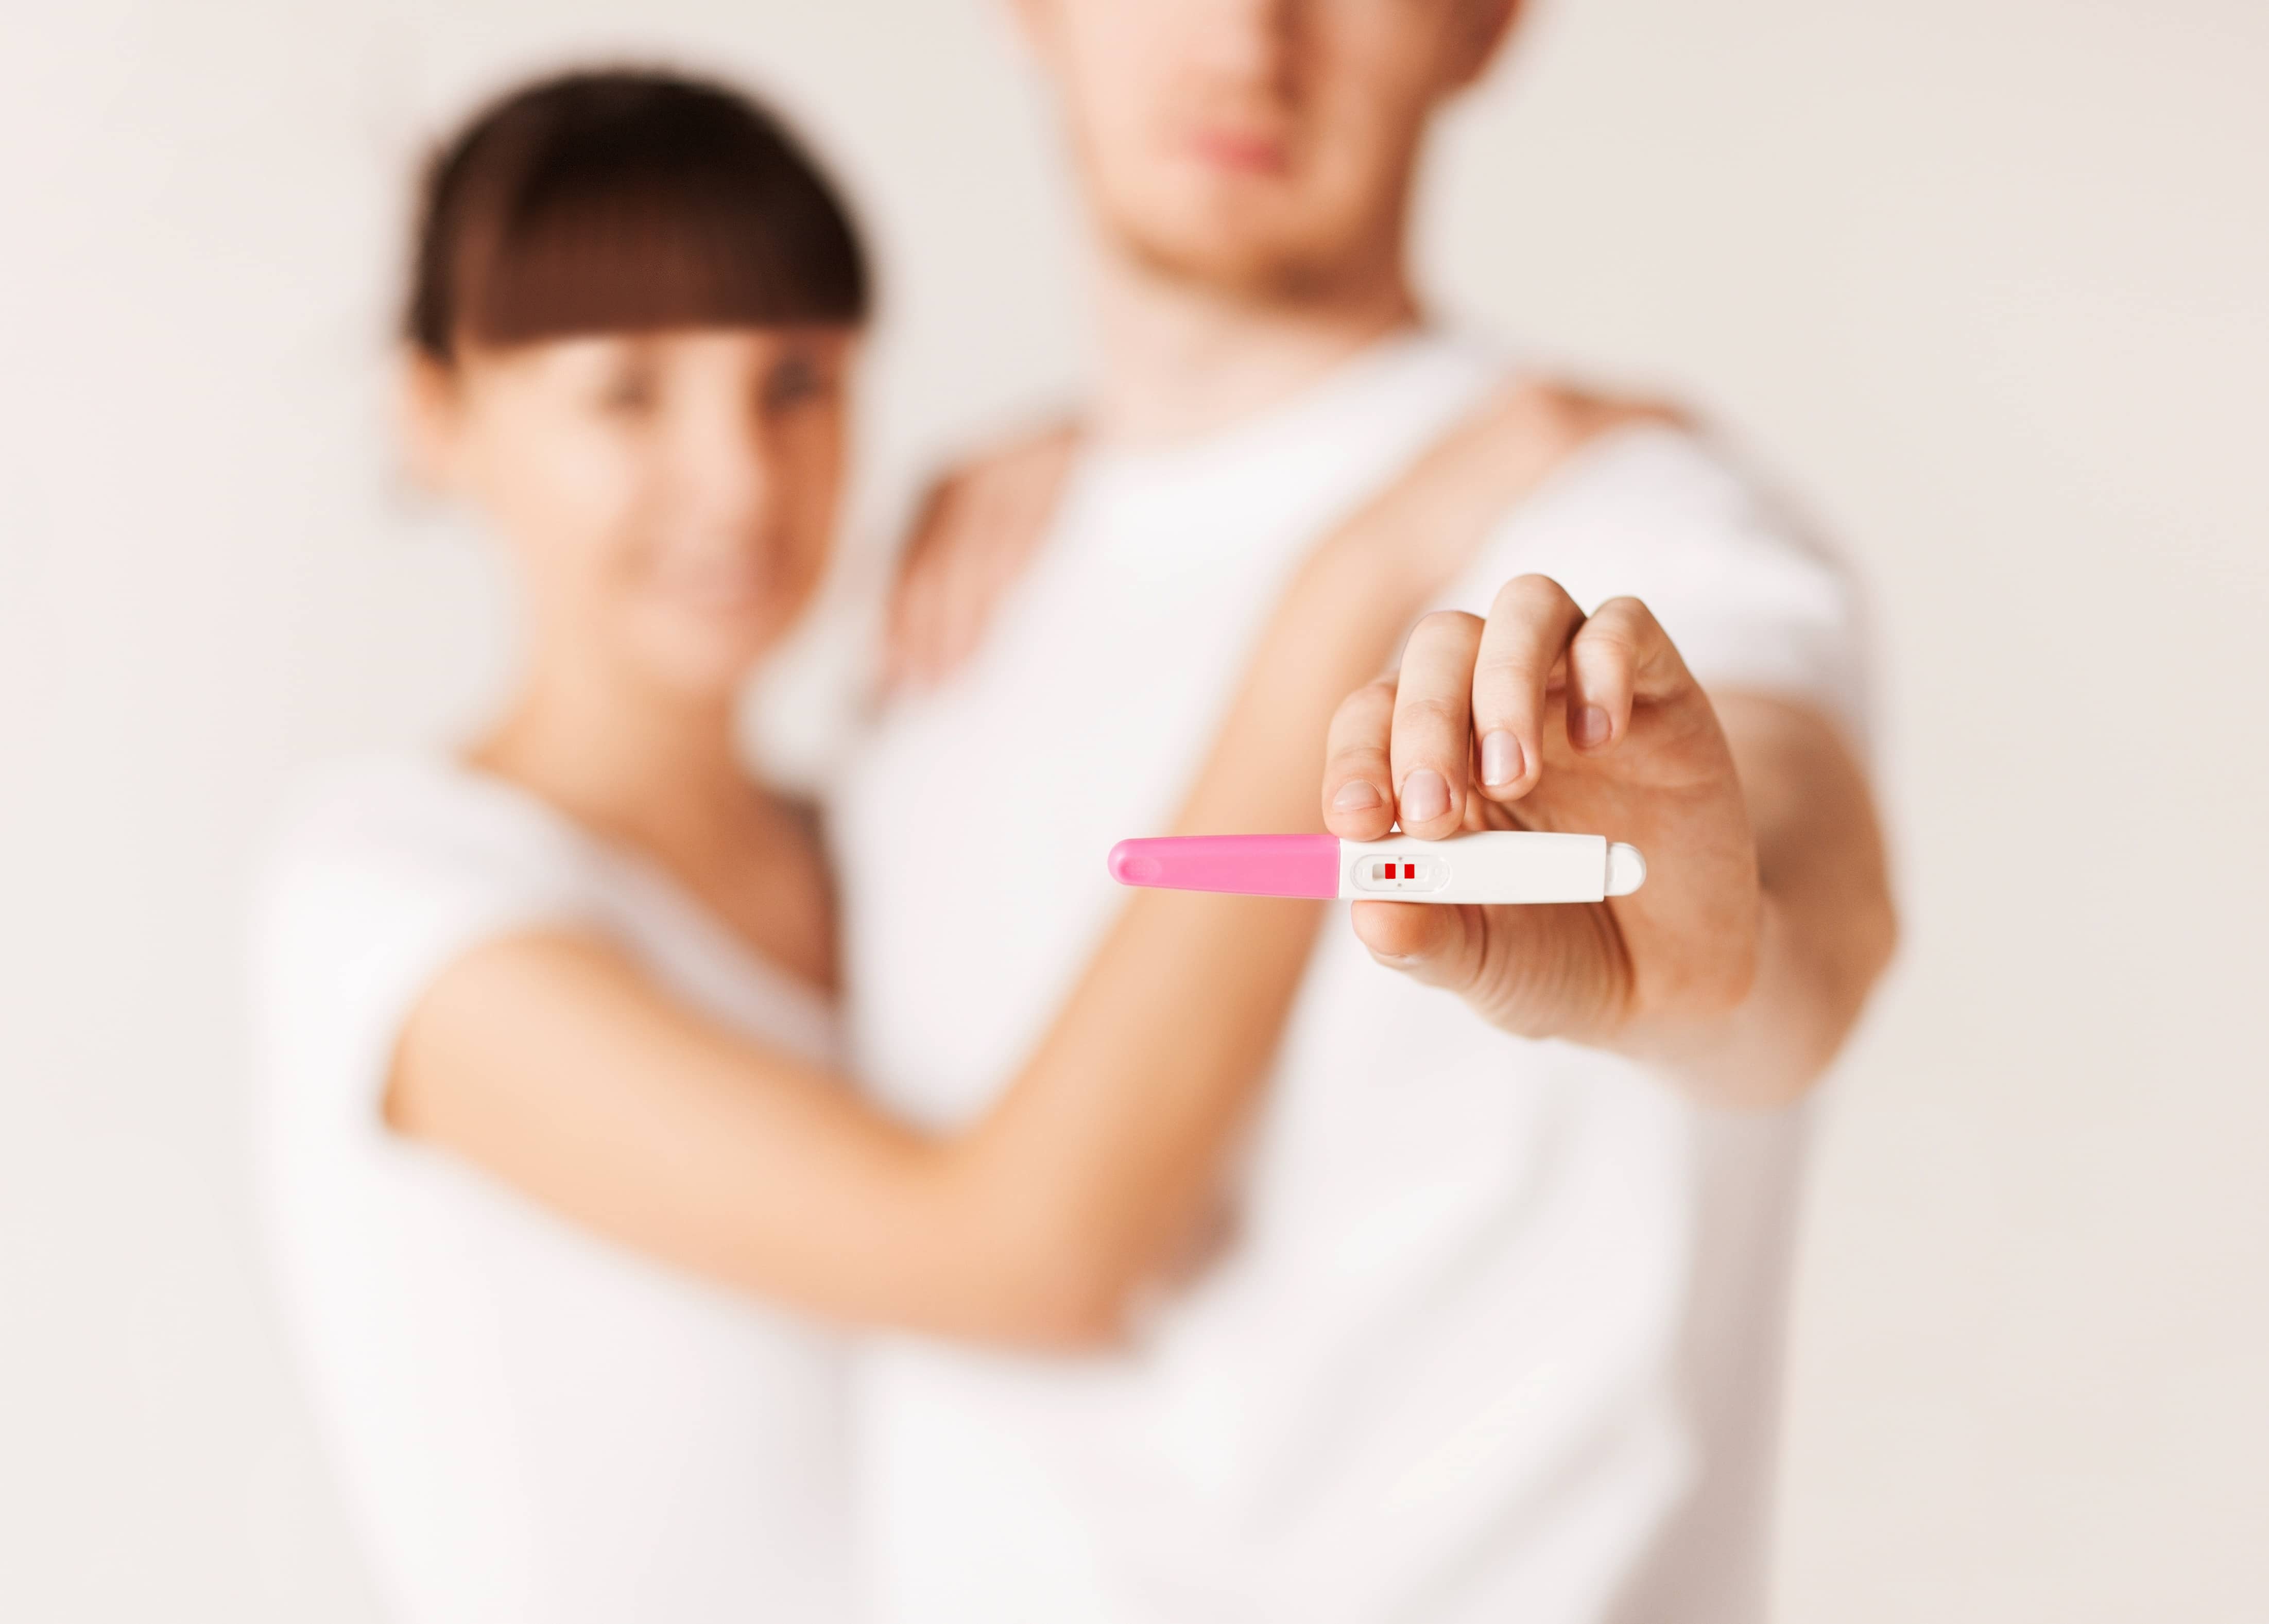 close up of woman and man hands with pregnancy test